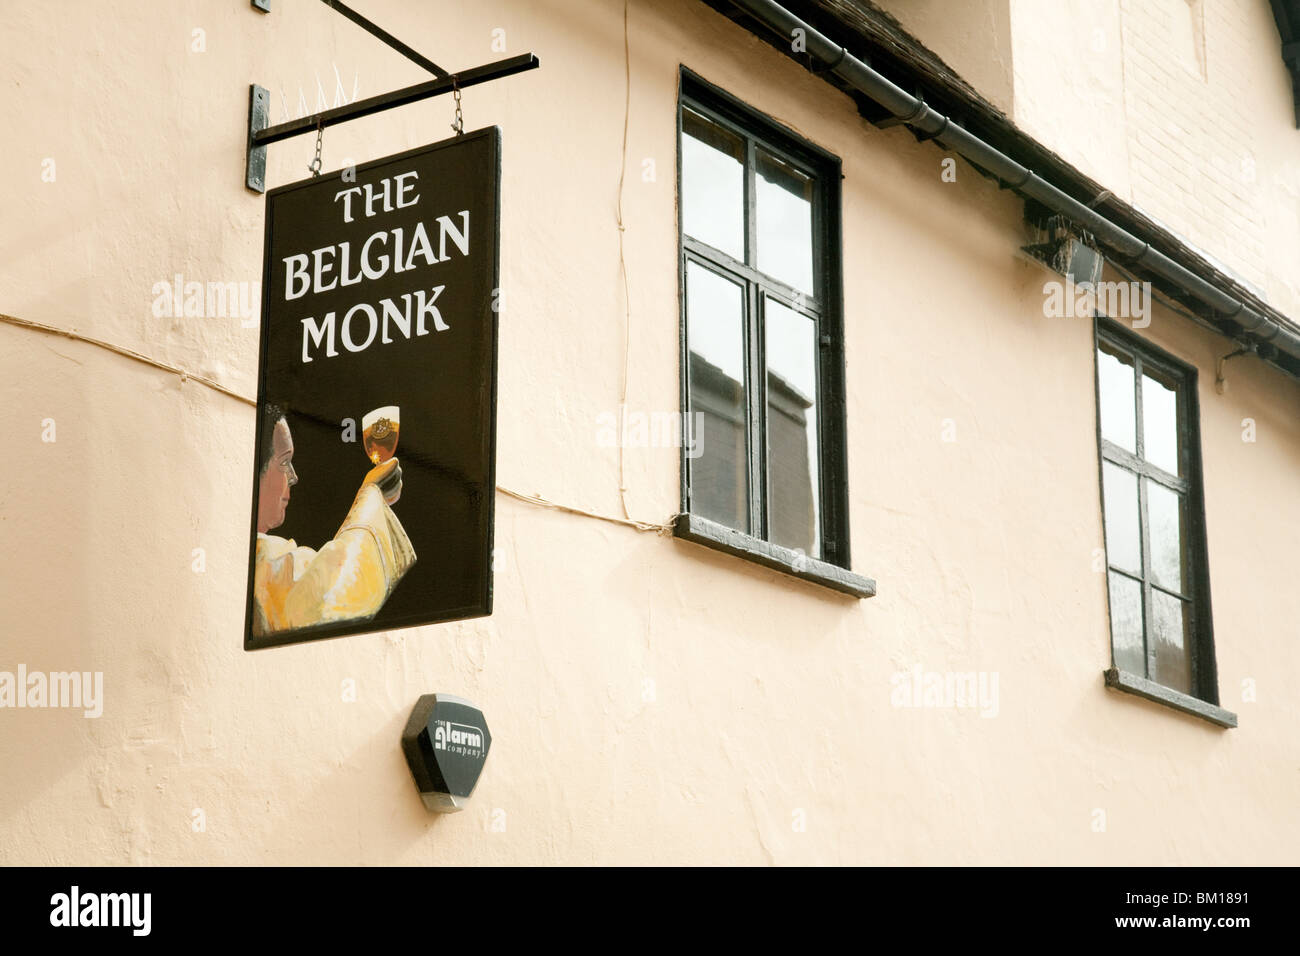 Sign for 'The Belgian Monk' pub, Norwich, Norfolk, UK Stock Photo